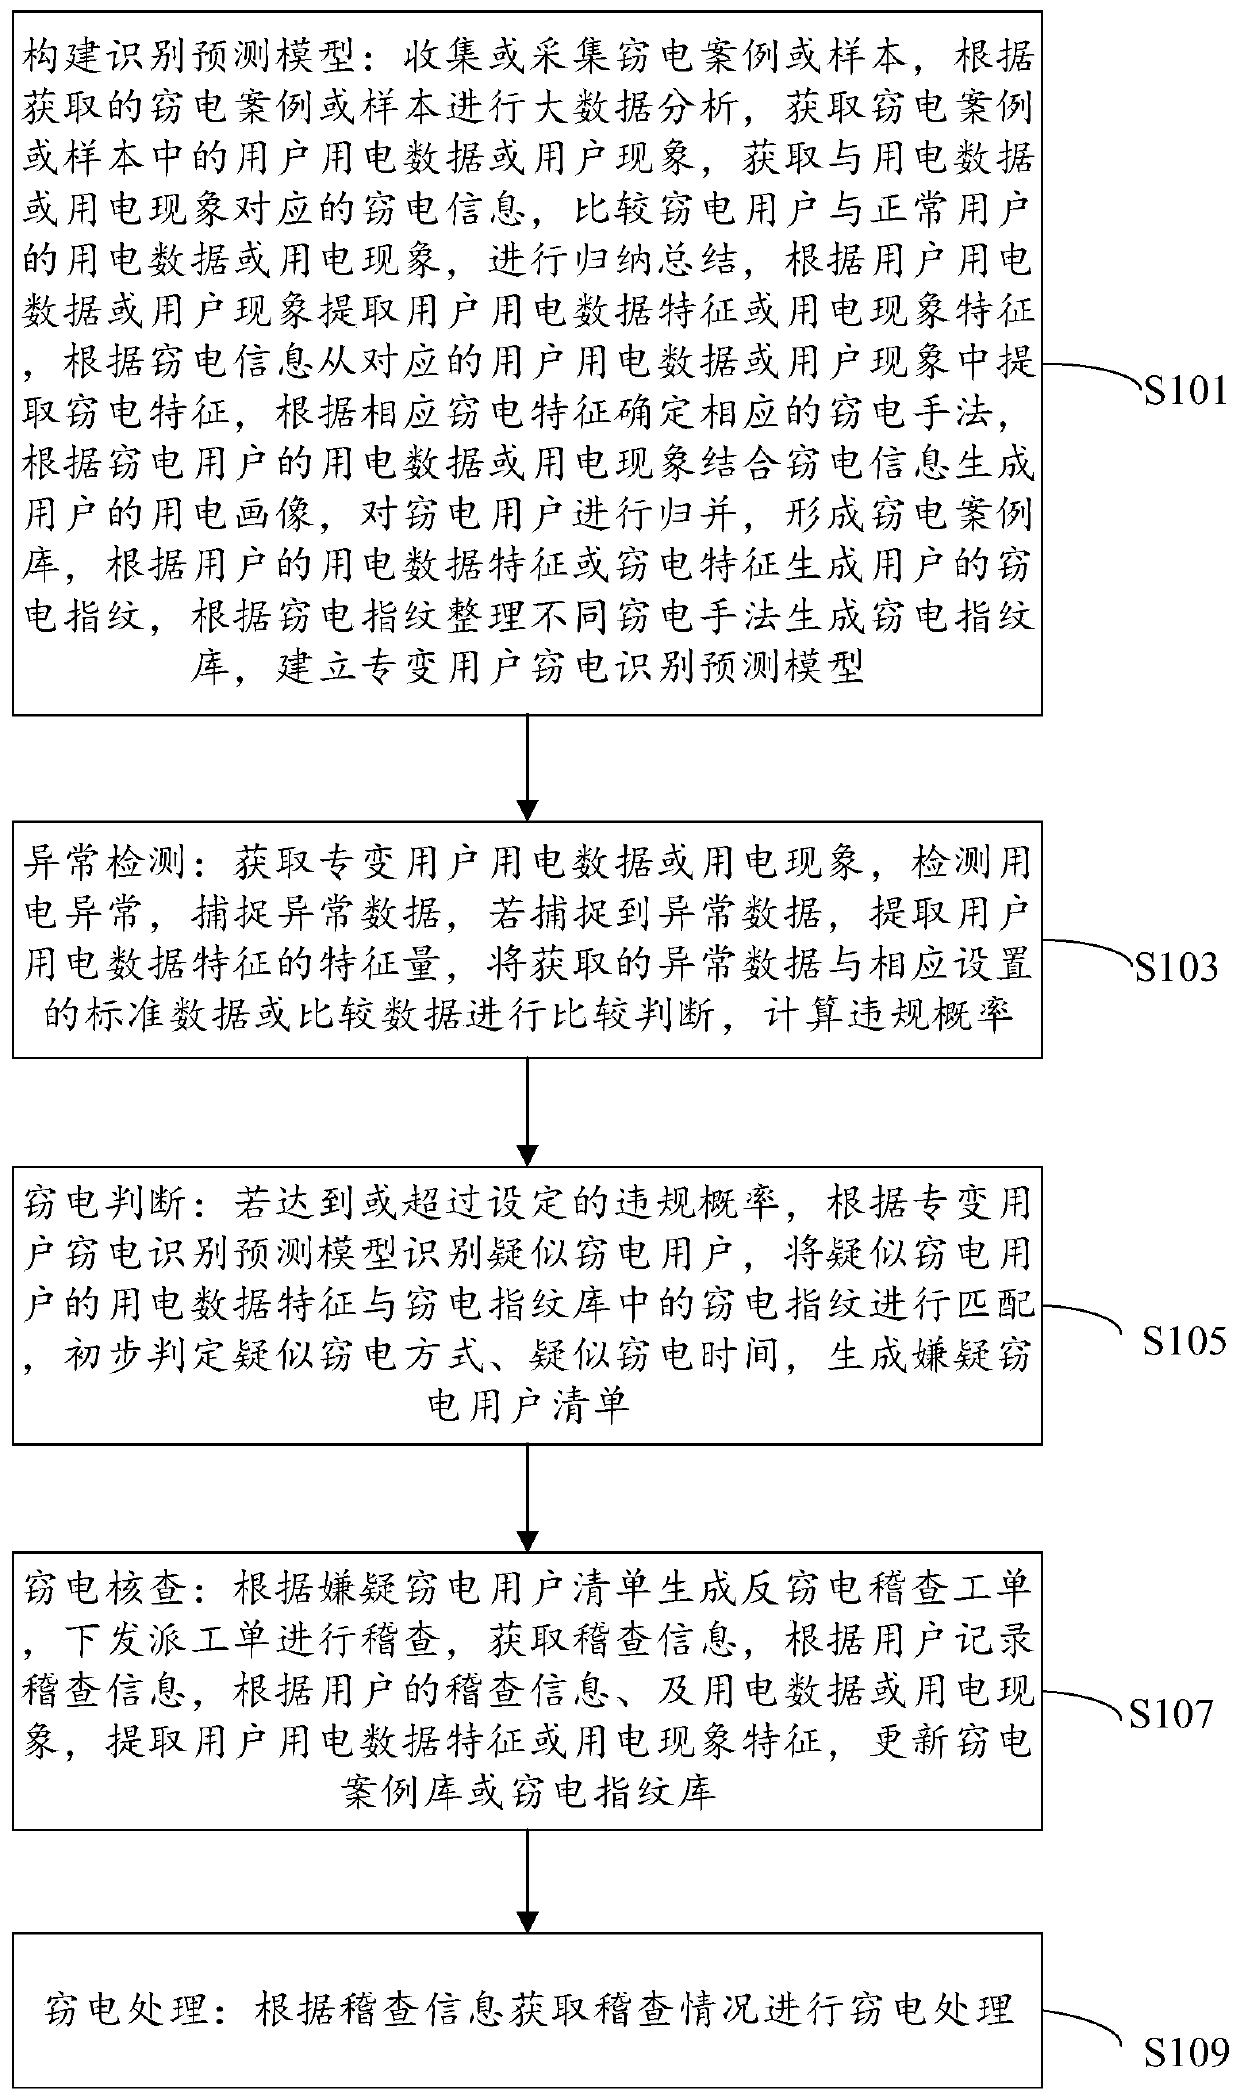 Anti-electricity-stealing inspection monitoring method and platform